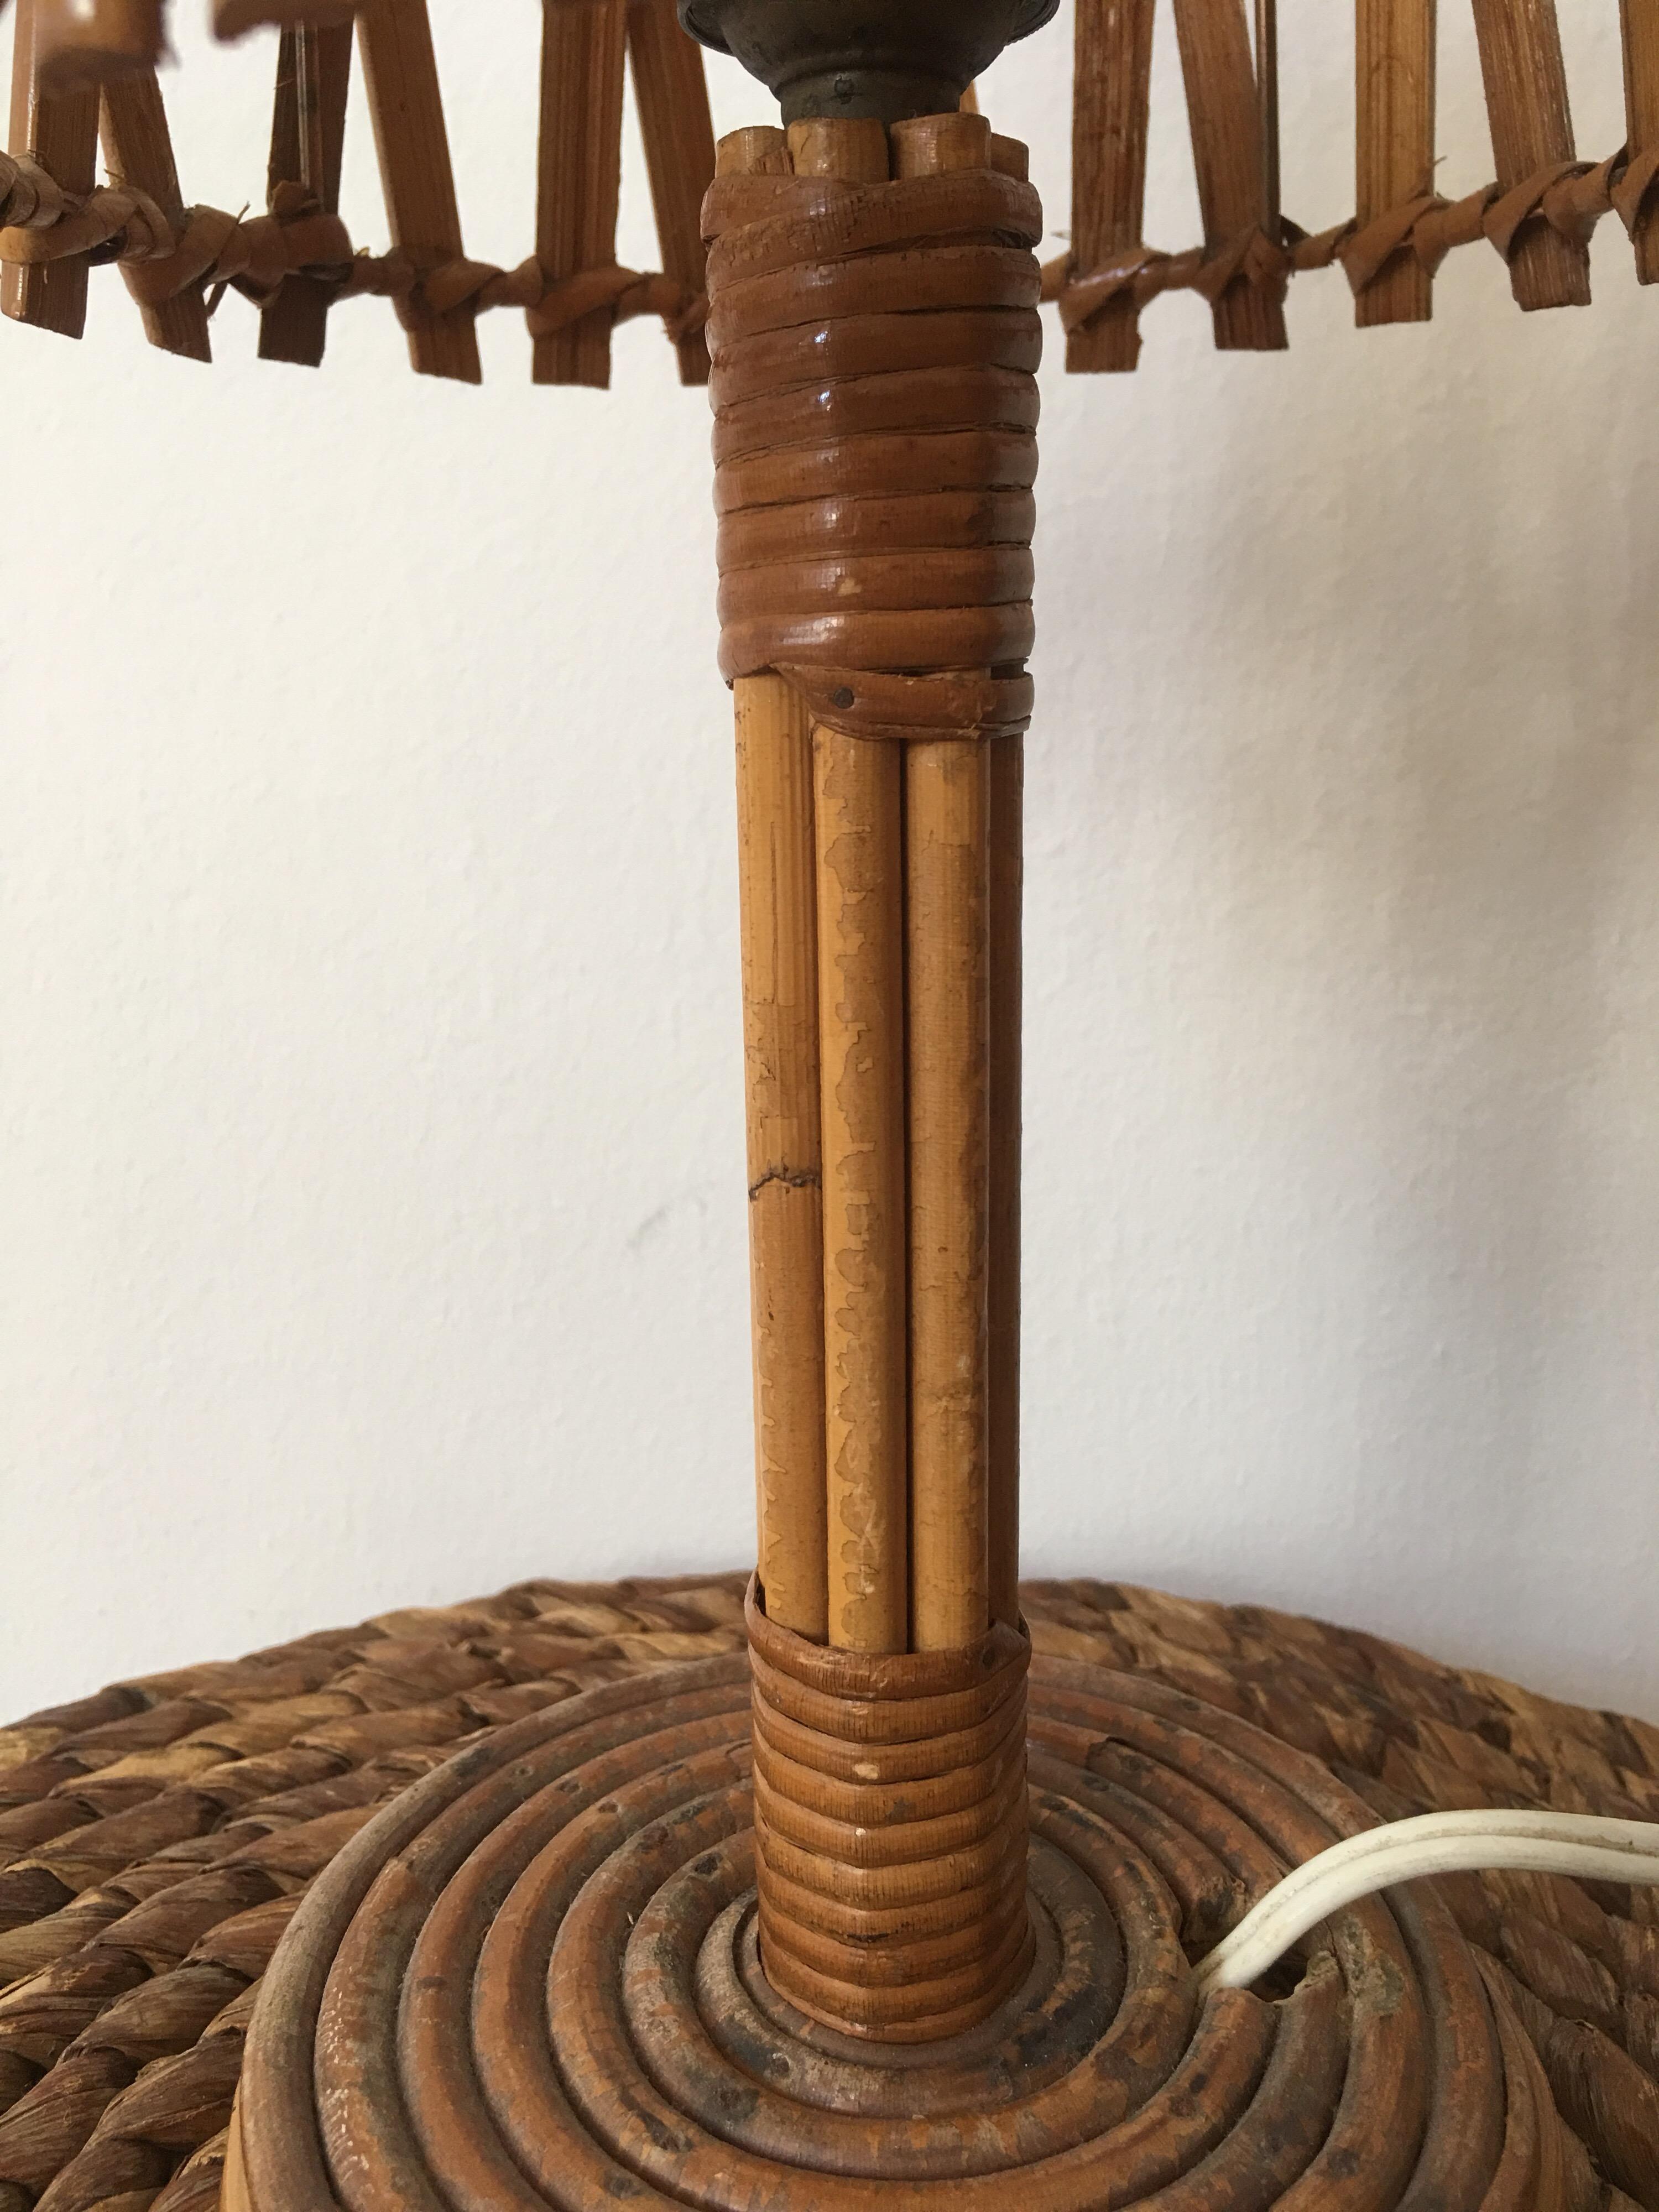 Louis Sognot Rattan Table Lamp, Original Rattan Lampshade, French, 1950s For Sale 4